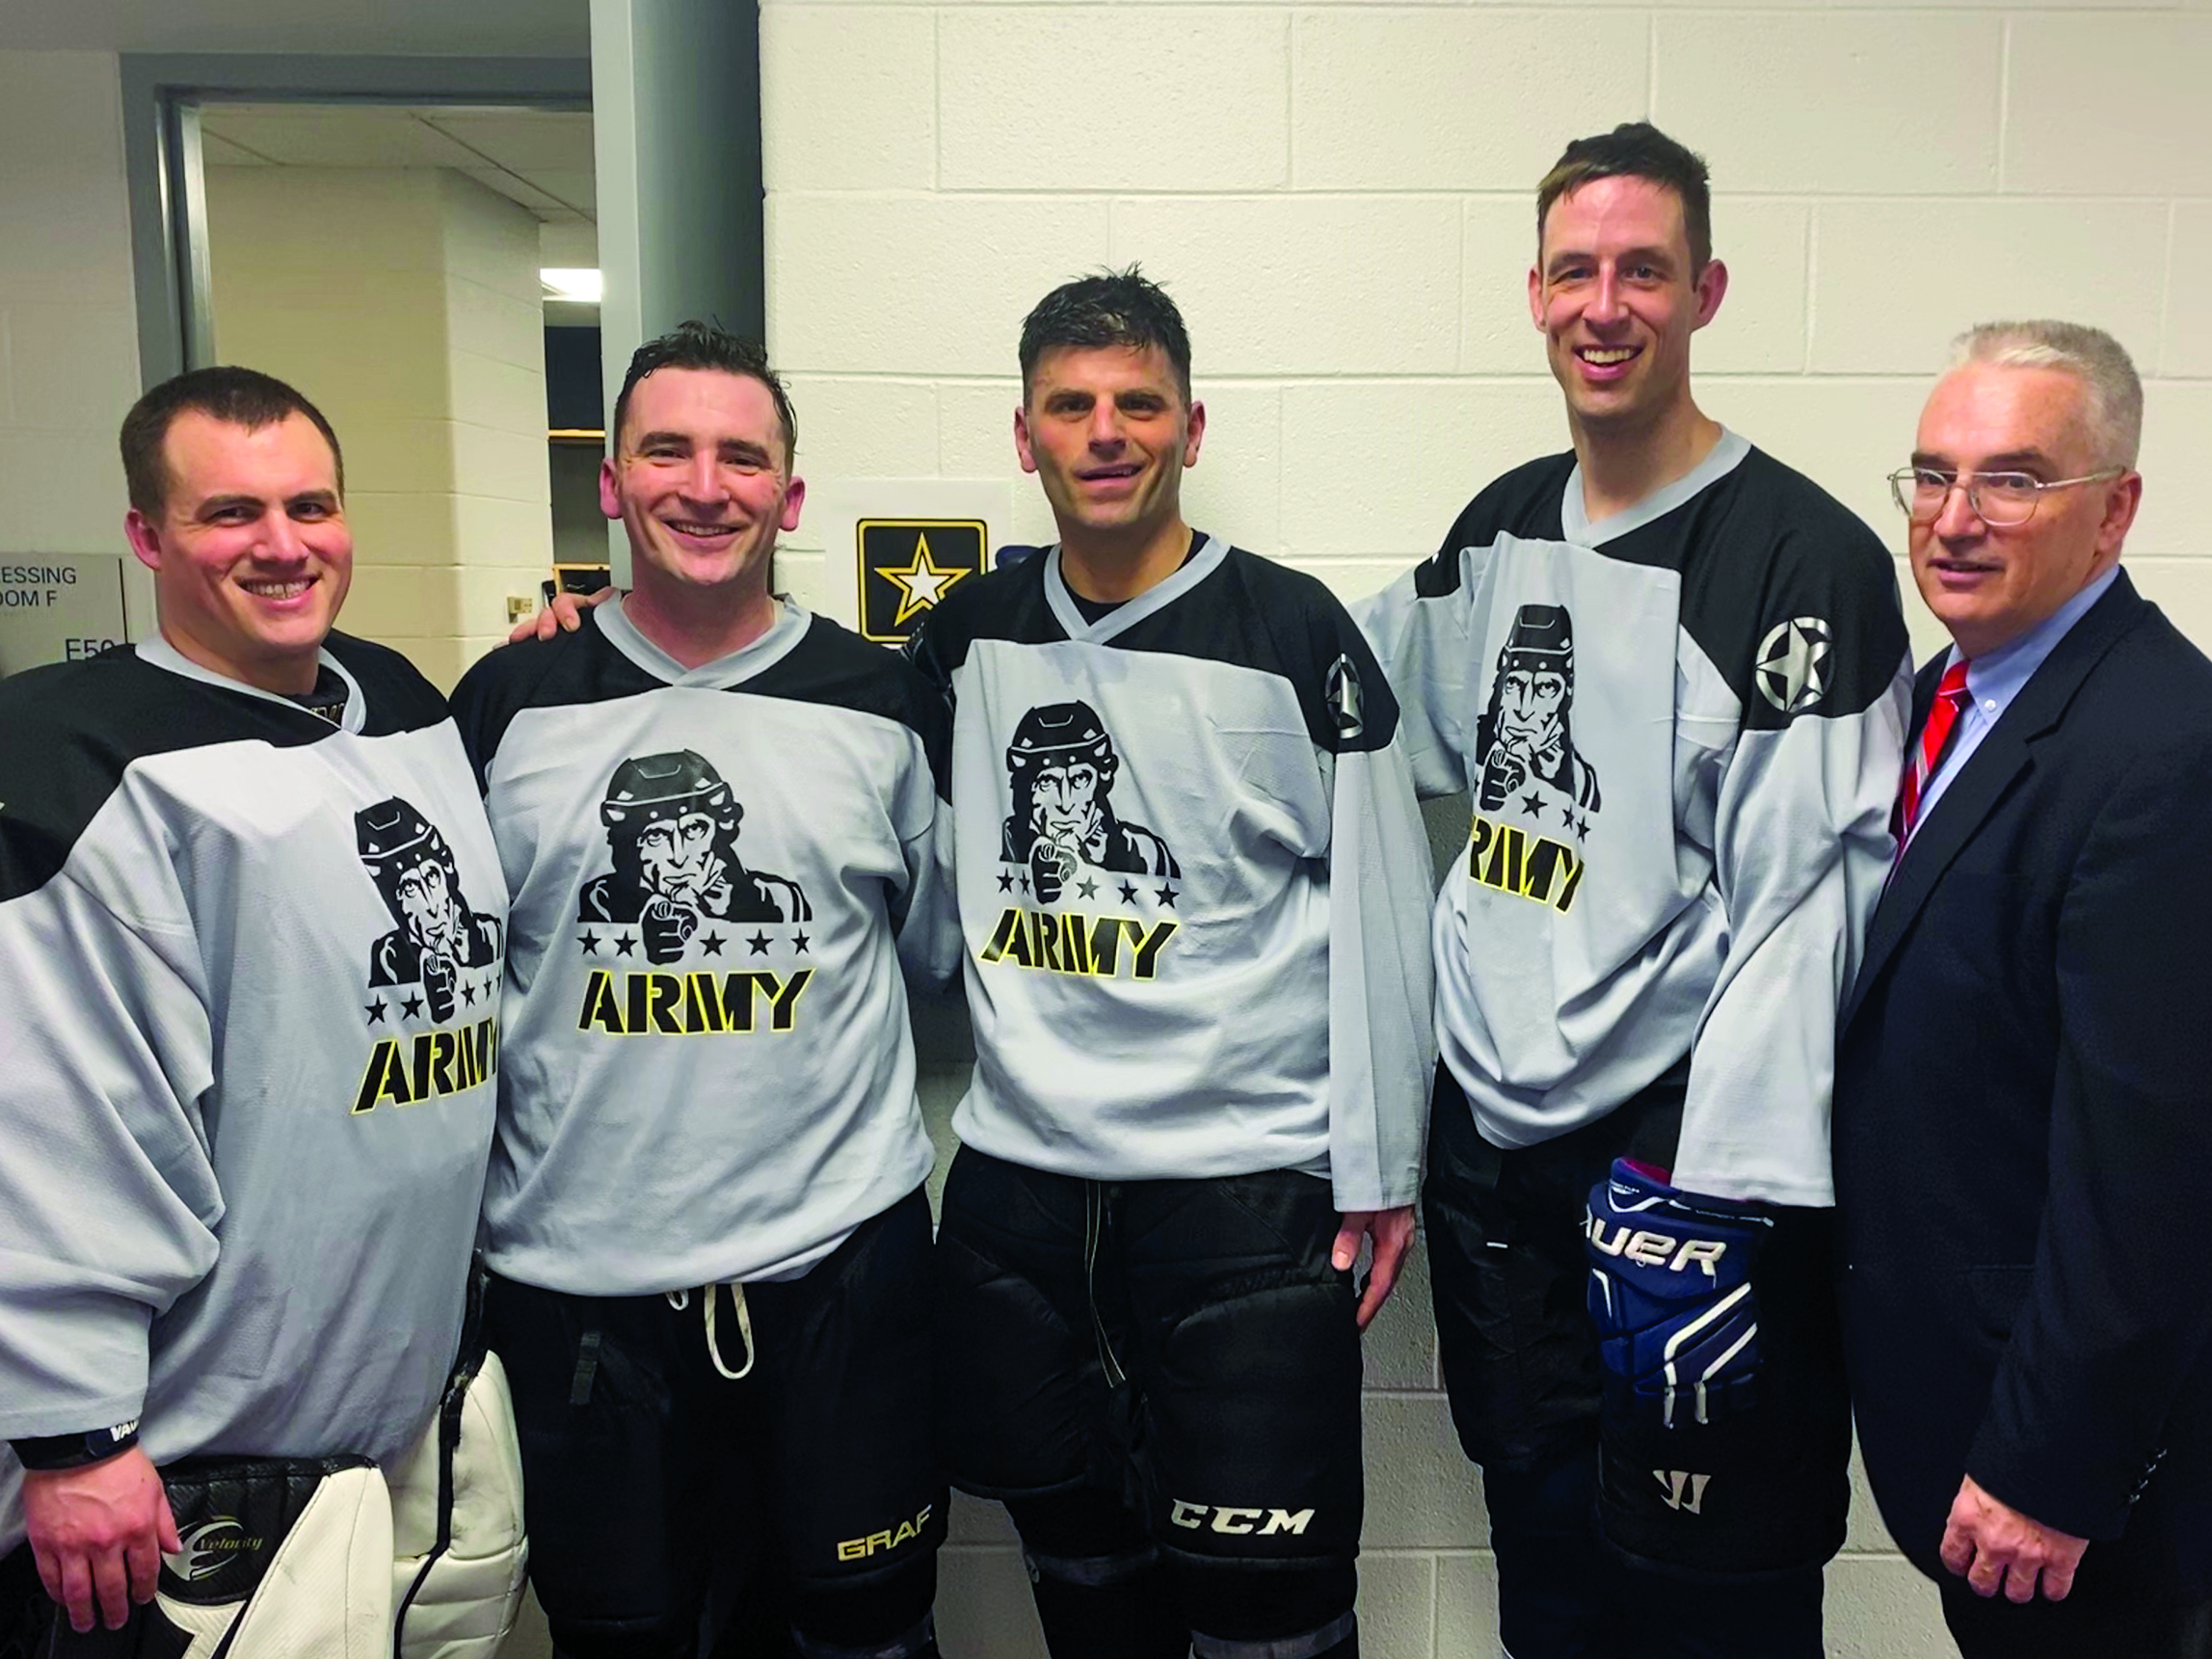 The JAG Corps was once again well-represented at the annual Army-Navy Hockey game played at Capital One Arena in Washington, DC. From left to right: CPT Marc Emond (Government Appellate Division, USALSA), CPT Alex Boettcher (Fort Belvoir OSJA), MAJ Jack Einhorn (Defense Appellate Division, USALSA), SSG Michael Crocker (151st LOD), and COL (Ret.) Mike Mulligan. In a fairly physical matchup, all attorneys and paralegals escaped the game with no black eyes or lost teeth, and there were only two penalties attributed to the group. Surprising to no one who knows him, both penalties (roughing, goaltender interference) were simultaneously given to CPT Boettcher.